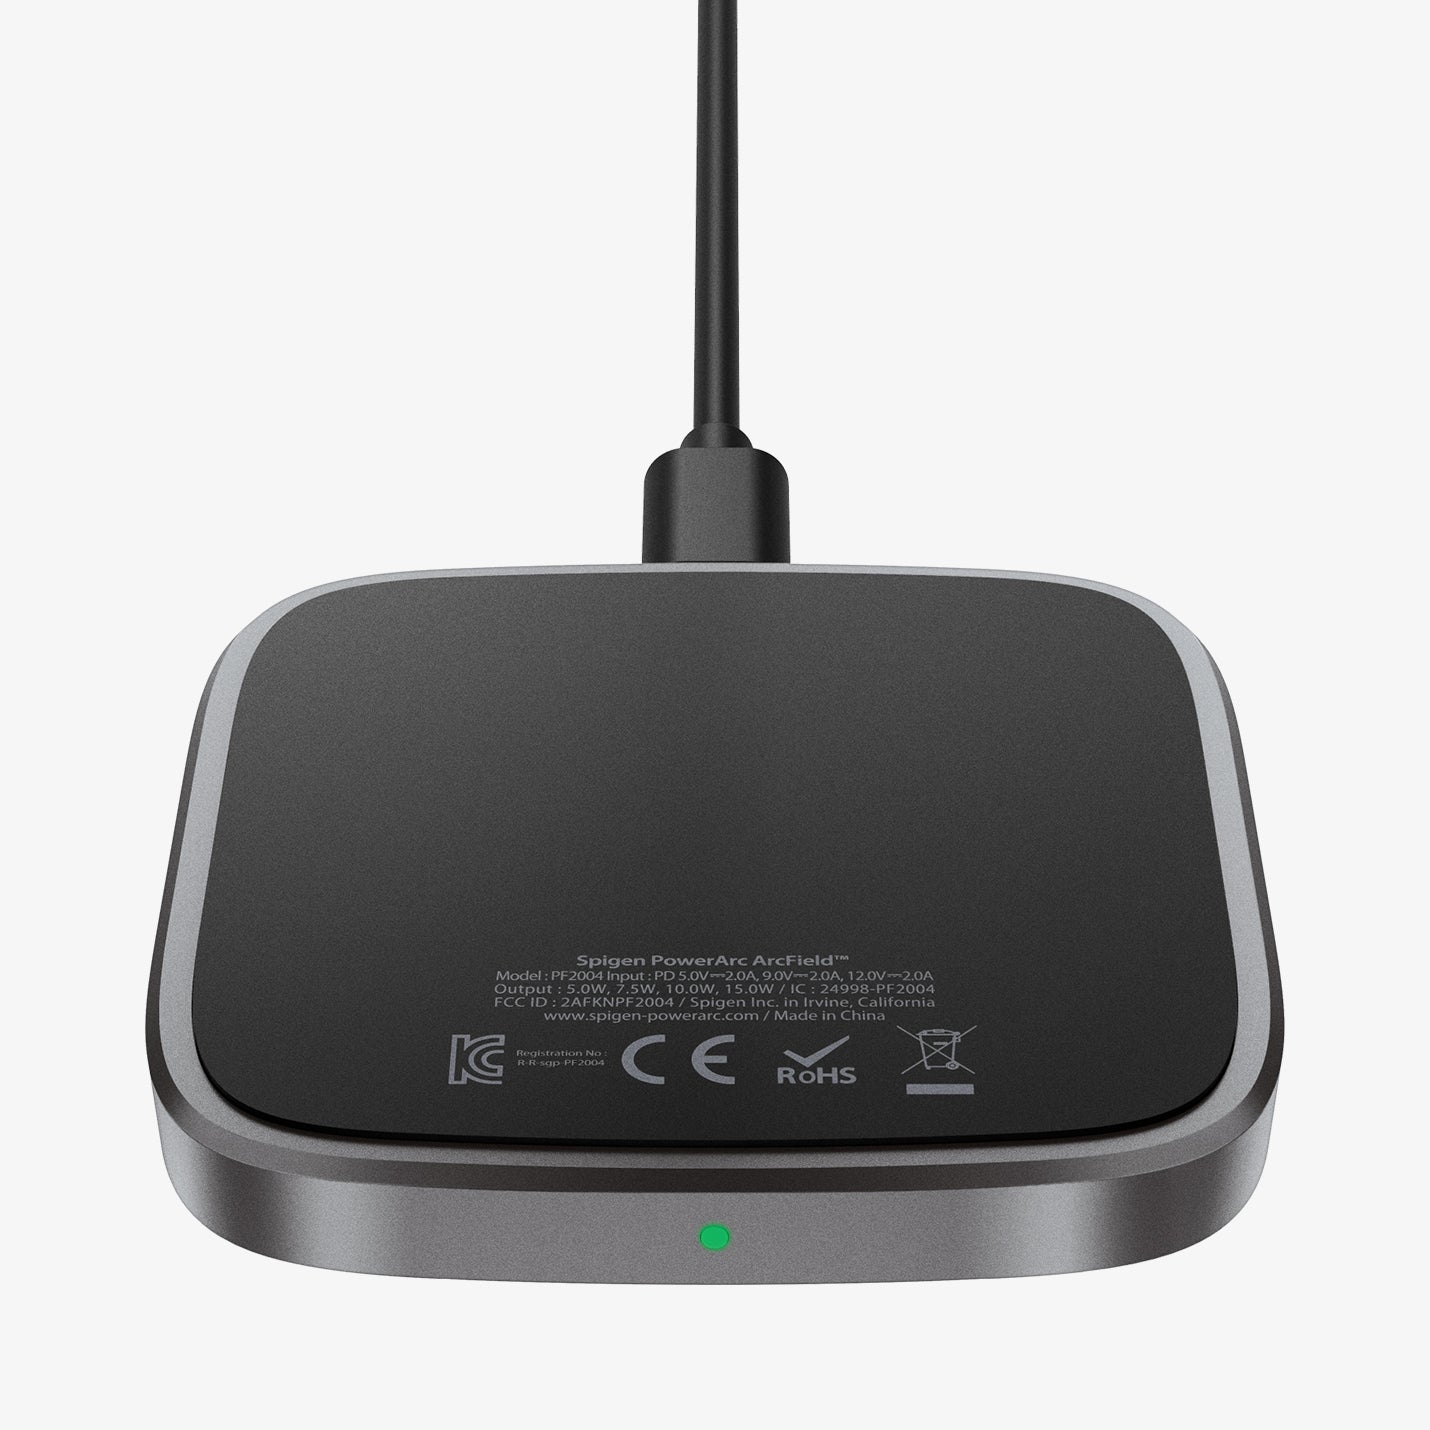 ACH02578 - ArcField™ 15W Max Wireless Charger PF2004 in black showing the bottom and front